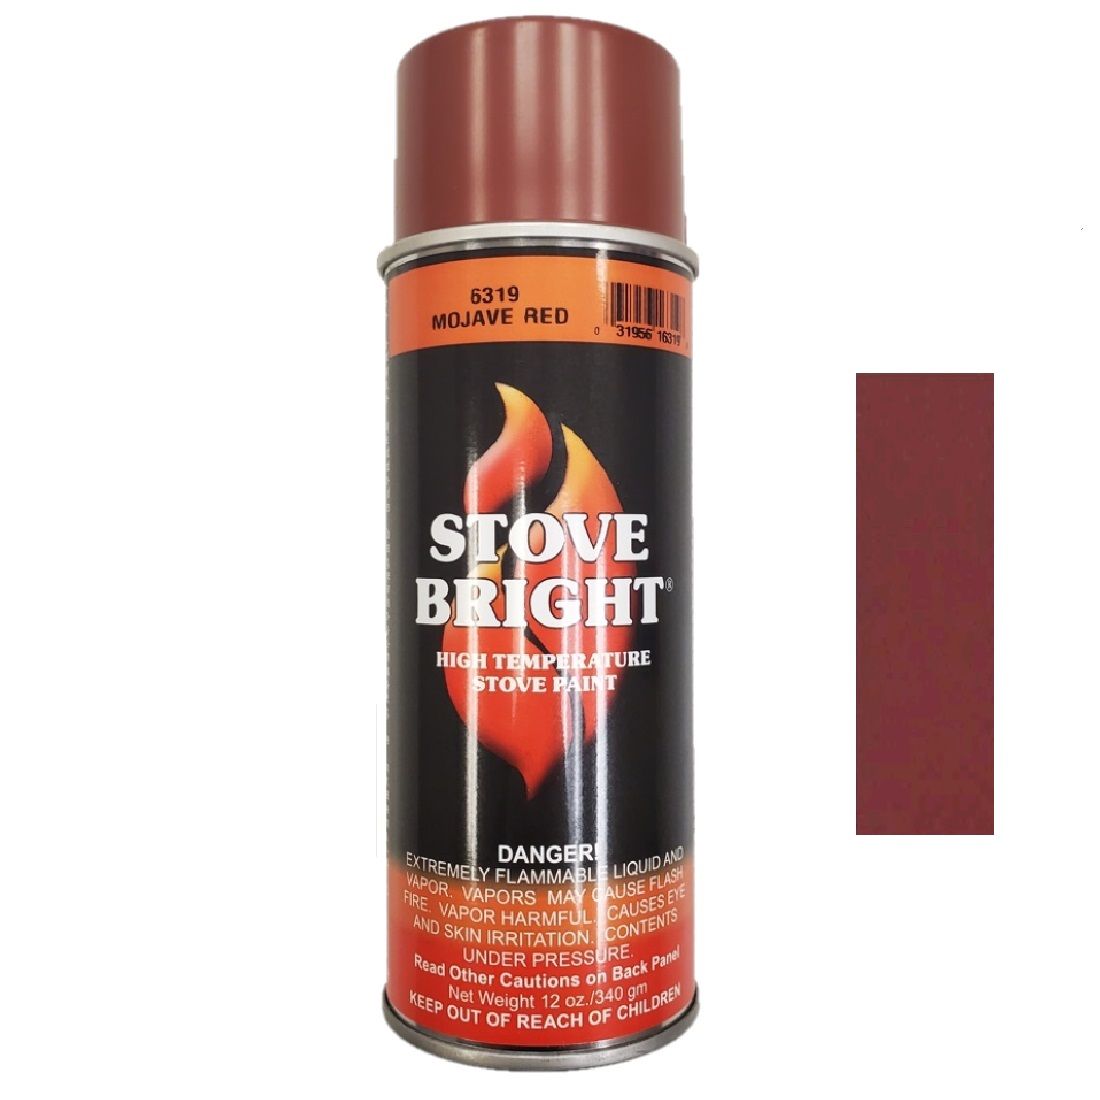 Stove Bright 6319 | Stove Paint | Mojave Red